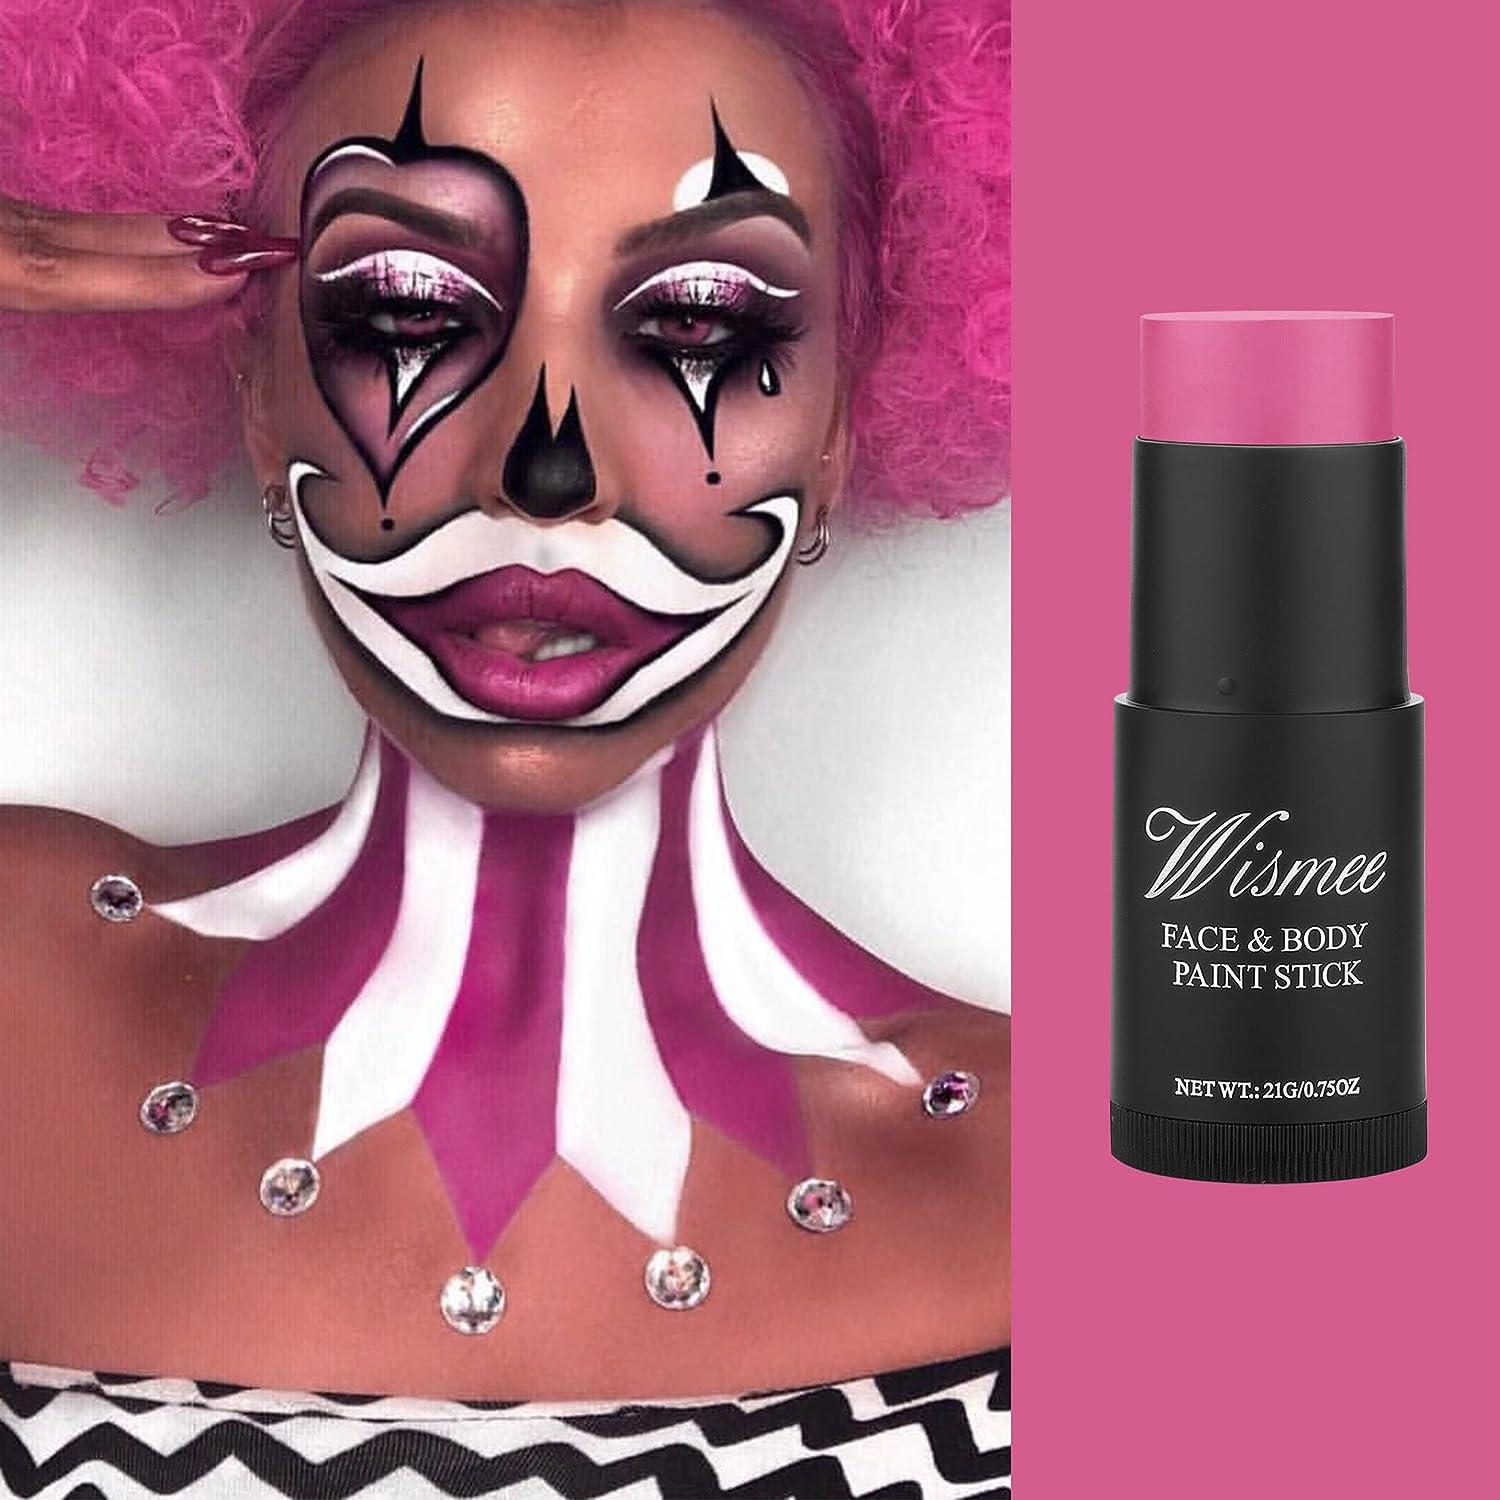 Wismee Pink Face Paint Stick (0.75Oz) Non-Toxic Oil Based Face Makeup Body  Paint Sticks High Pigmented Pink Makeup Crayons for Halloween Special  Effect Sfx Makeup #6 Pink